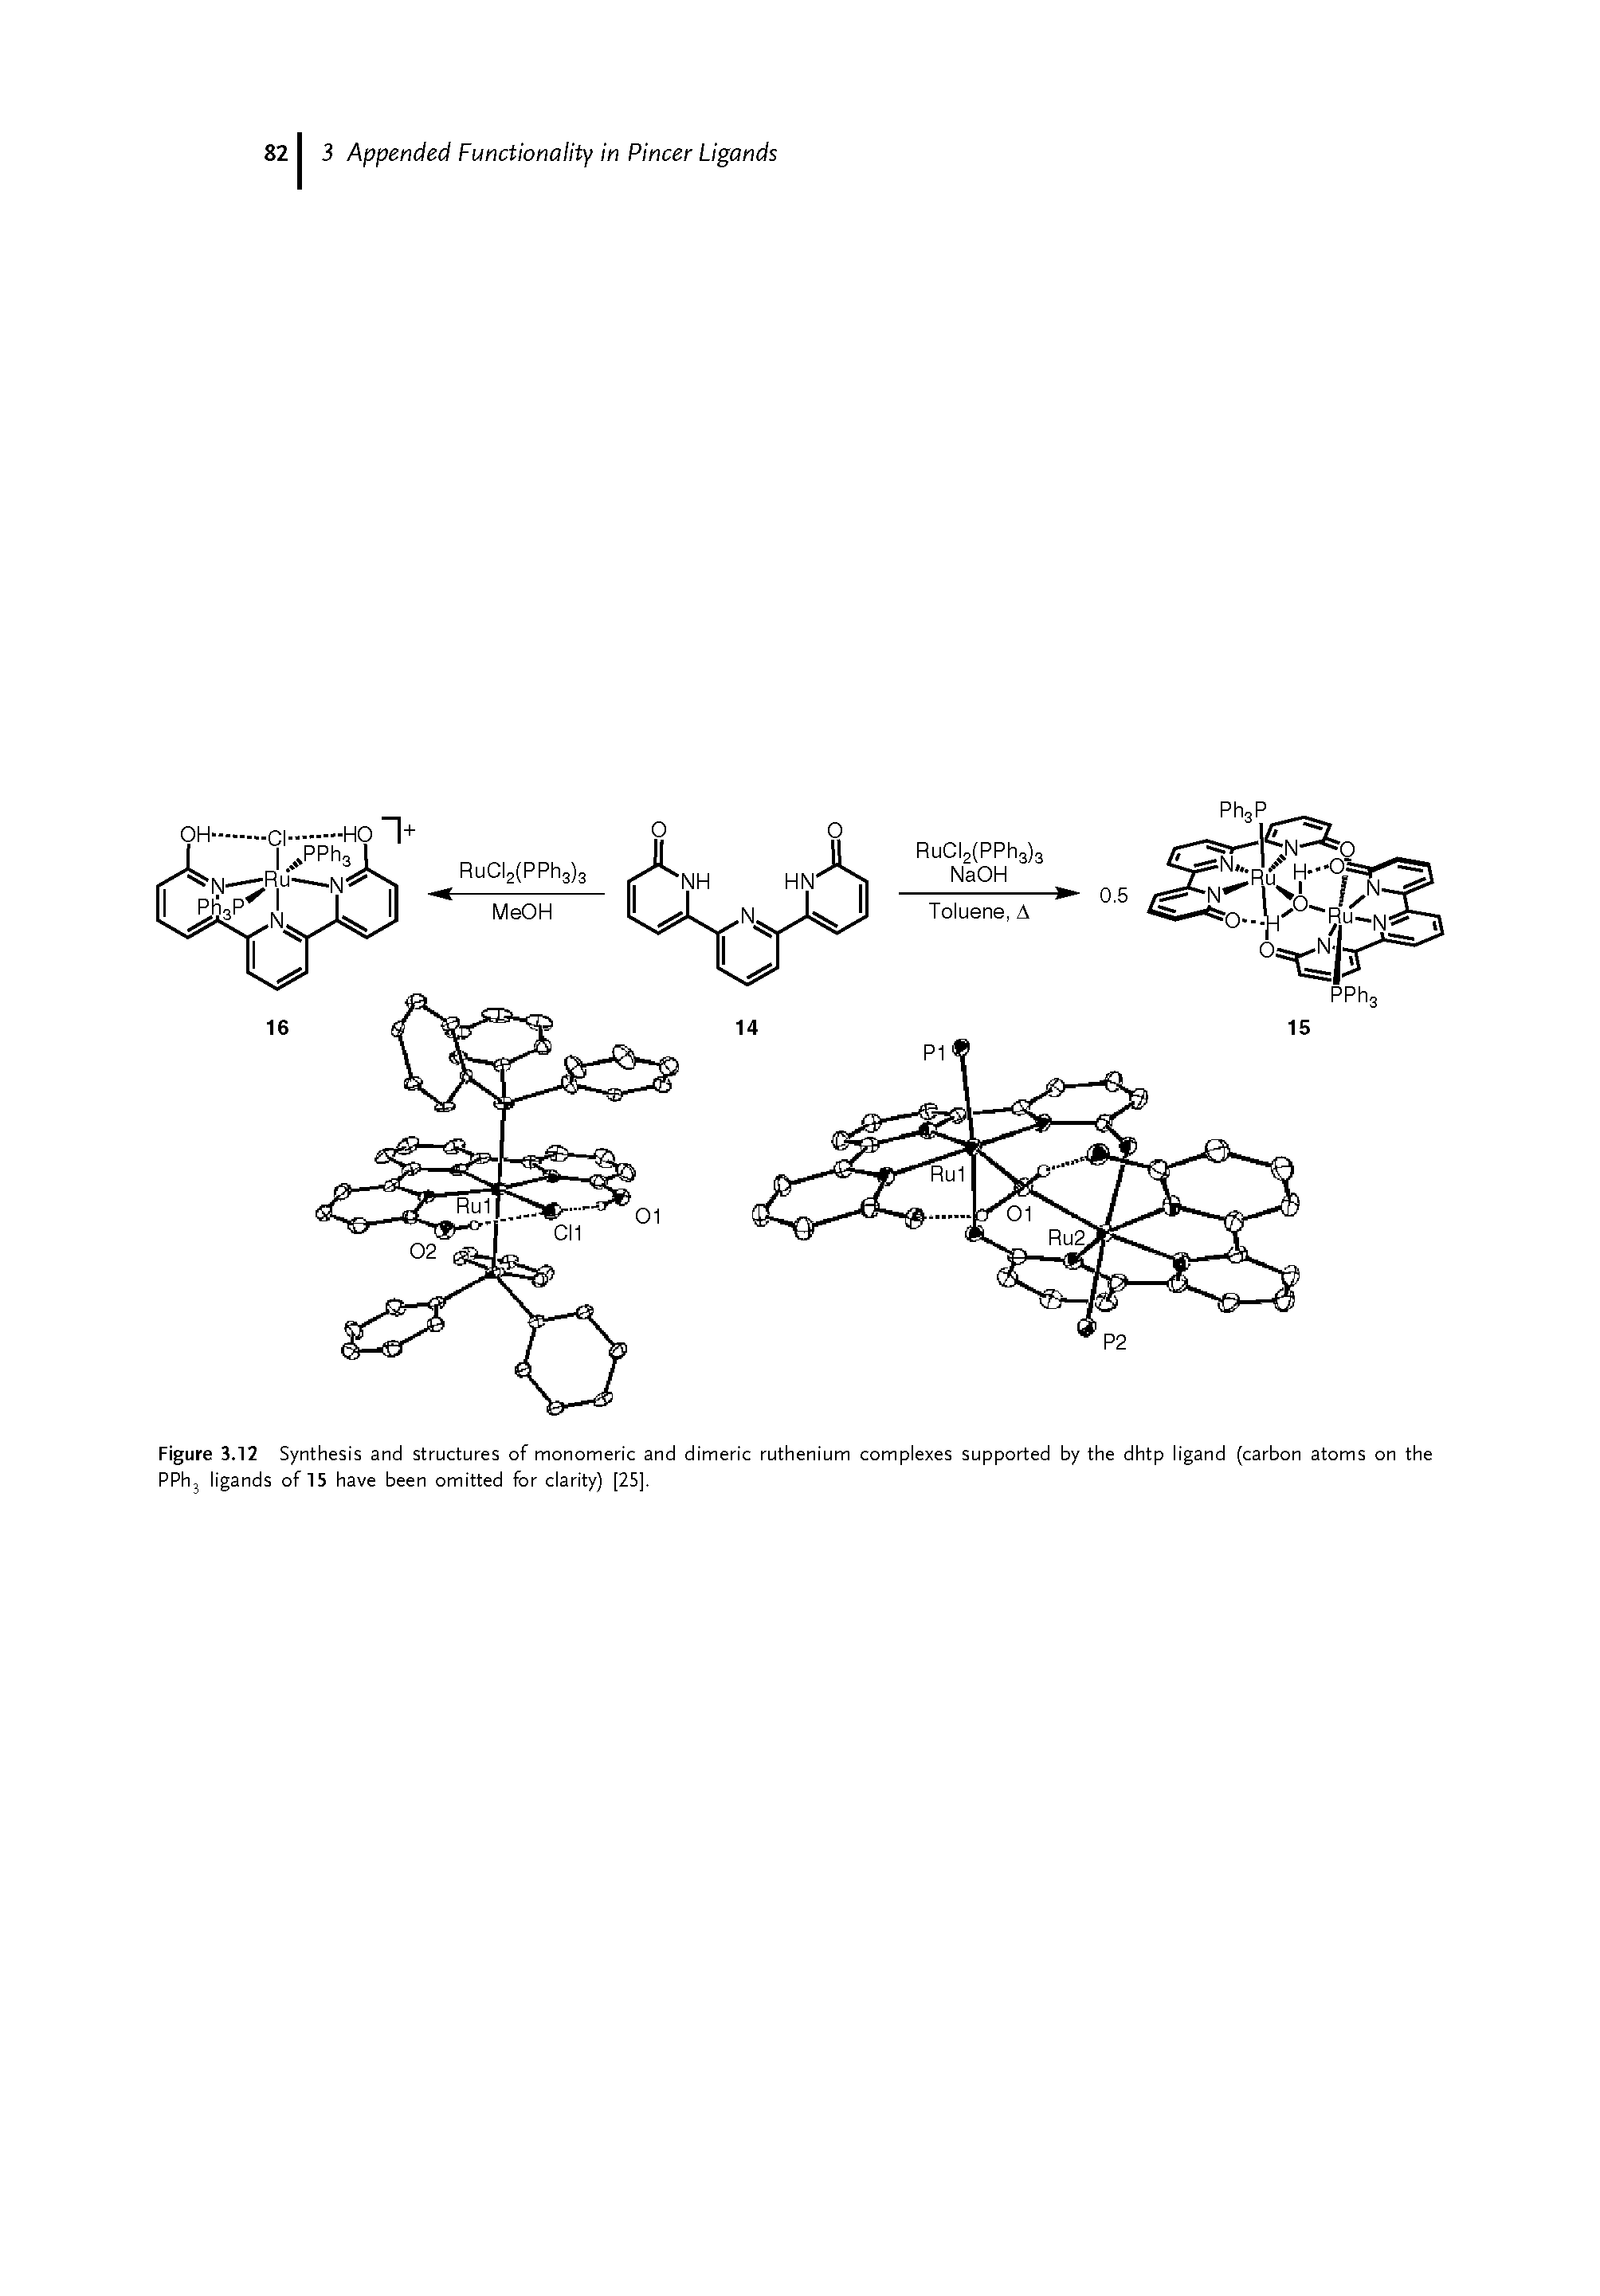 Figure 3.12 Synthesis and structures of monomeric and dimeric ruthenium complexes supported by the dhtp ligand (carbon atoms on the PPhj ligands of 15 have been omitted for clarity) [25].